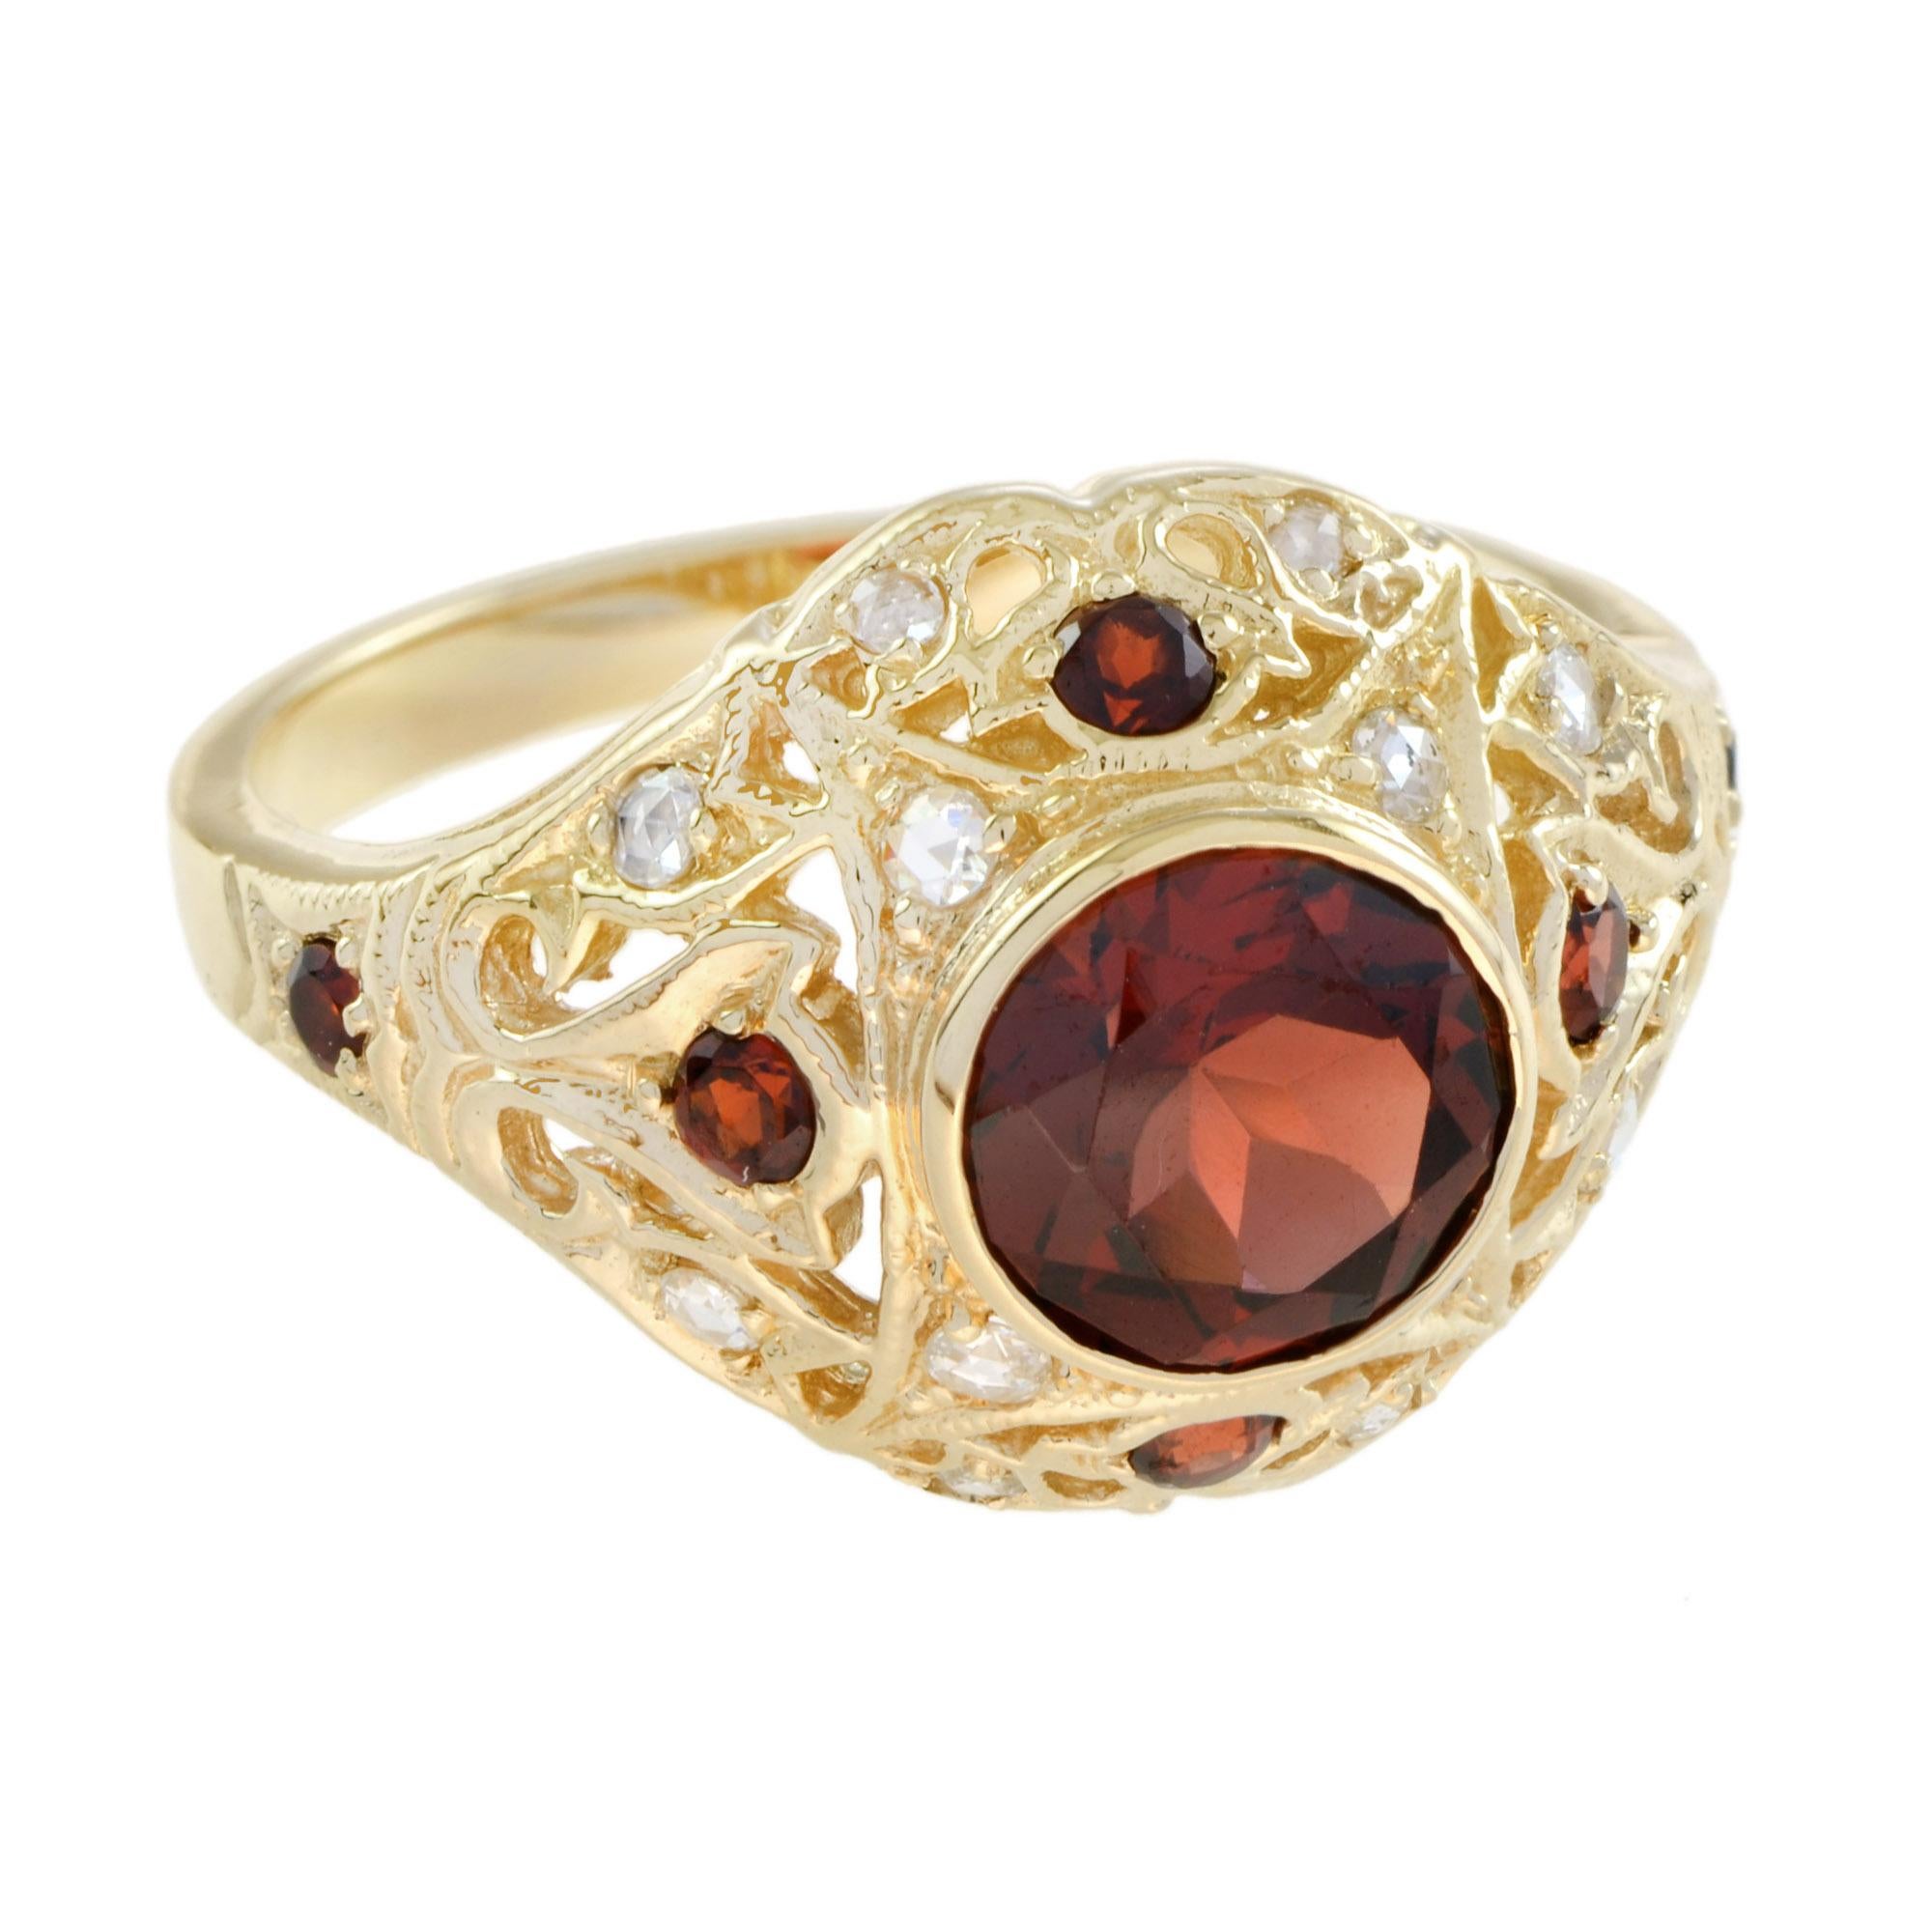 Featured here is an absolutely stunning garnet and diamond ring with glamorous Art Deco inspired design! The center features round natural garnet of 1.63 carats that is highlighted by round garnet and round cut diamonds. Don't miss your chance to